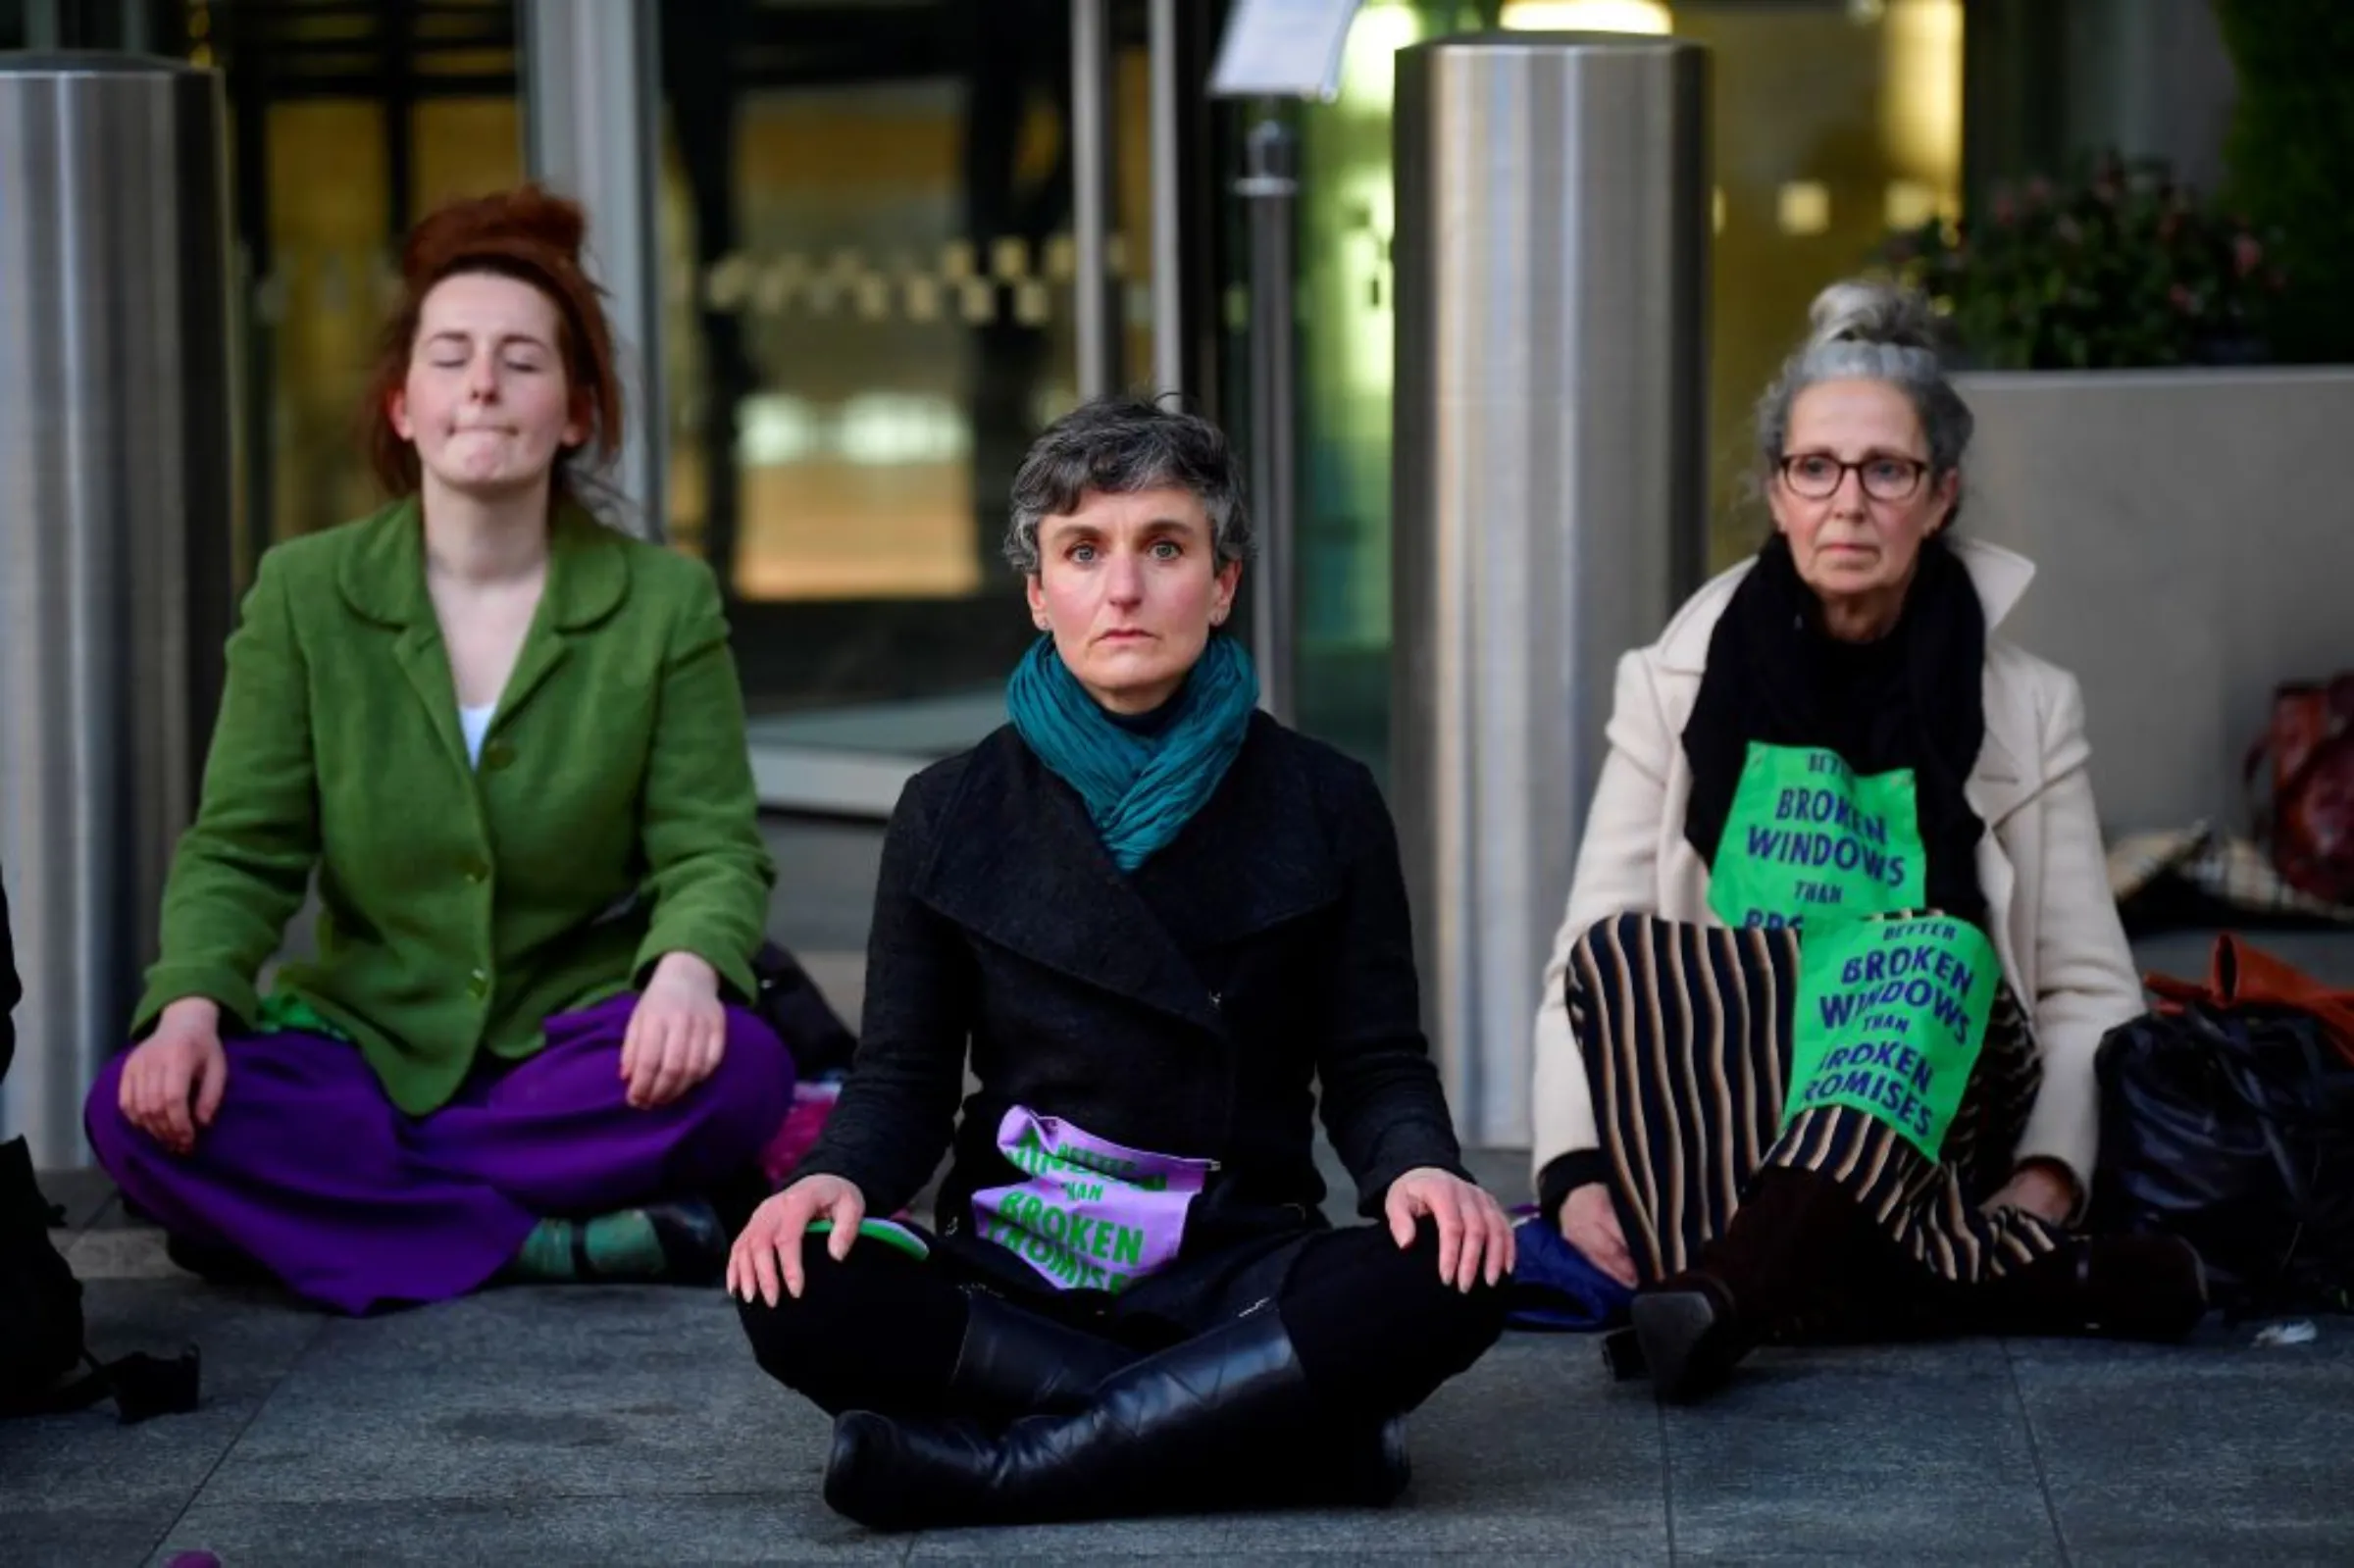 Activists from Extinction Rebellion, a global environmental movement, take part in a direct action at Barclays offices in Canary Wharf, London, Britain, April 7, 2021. REUTERS/Toby Melville